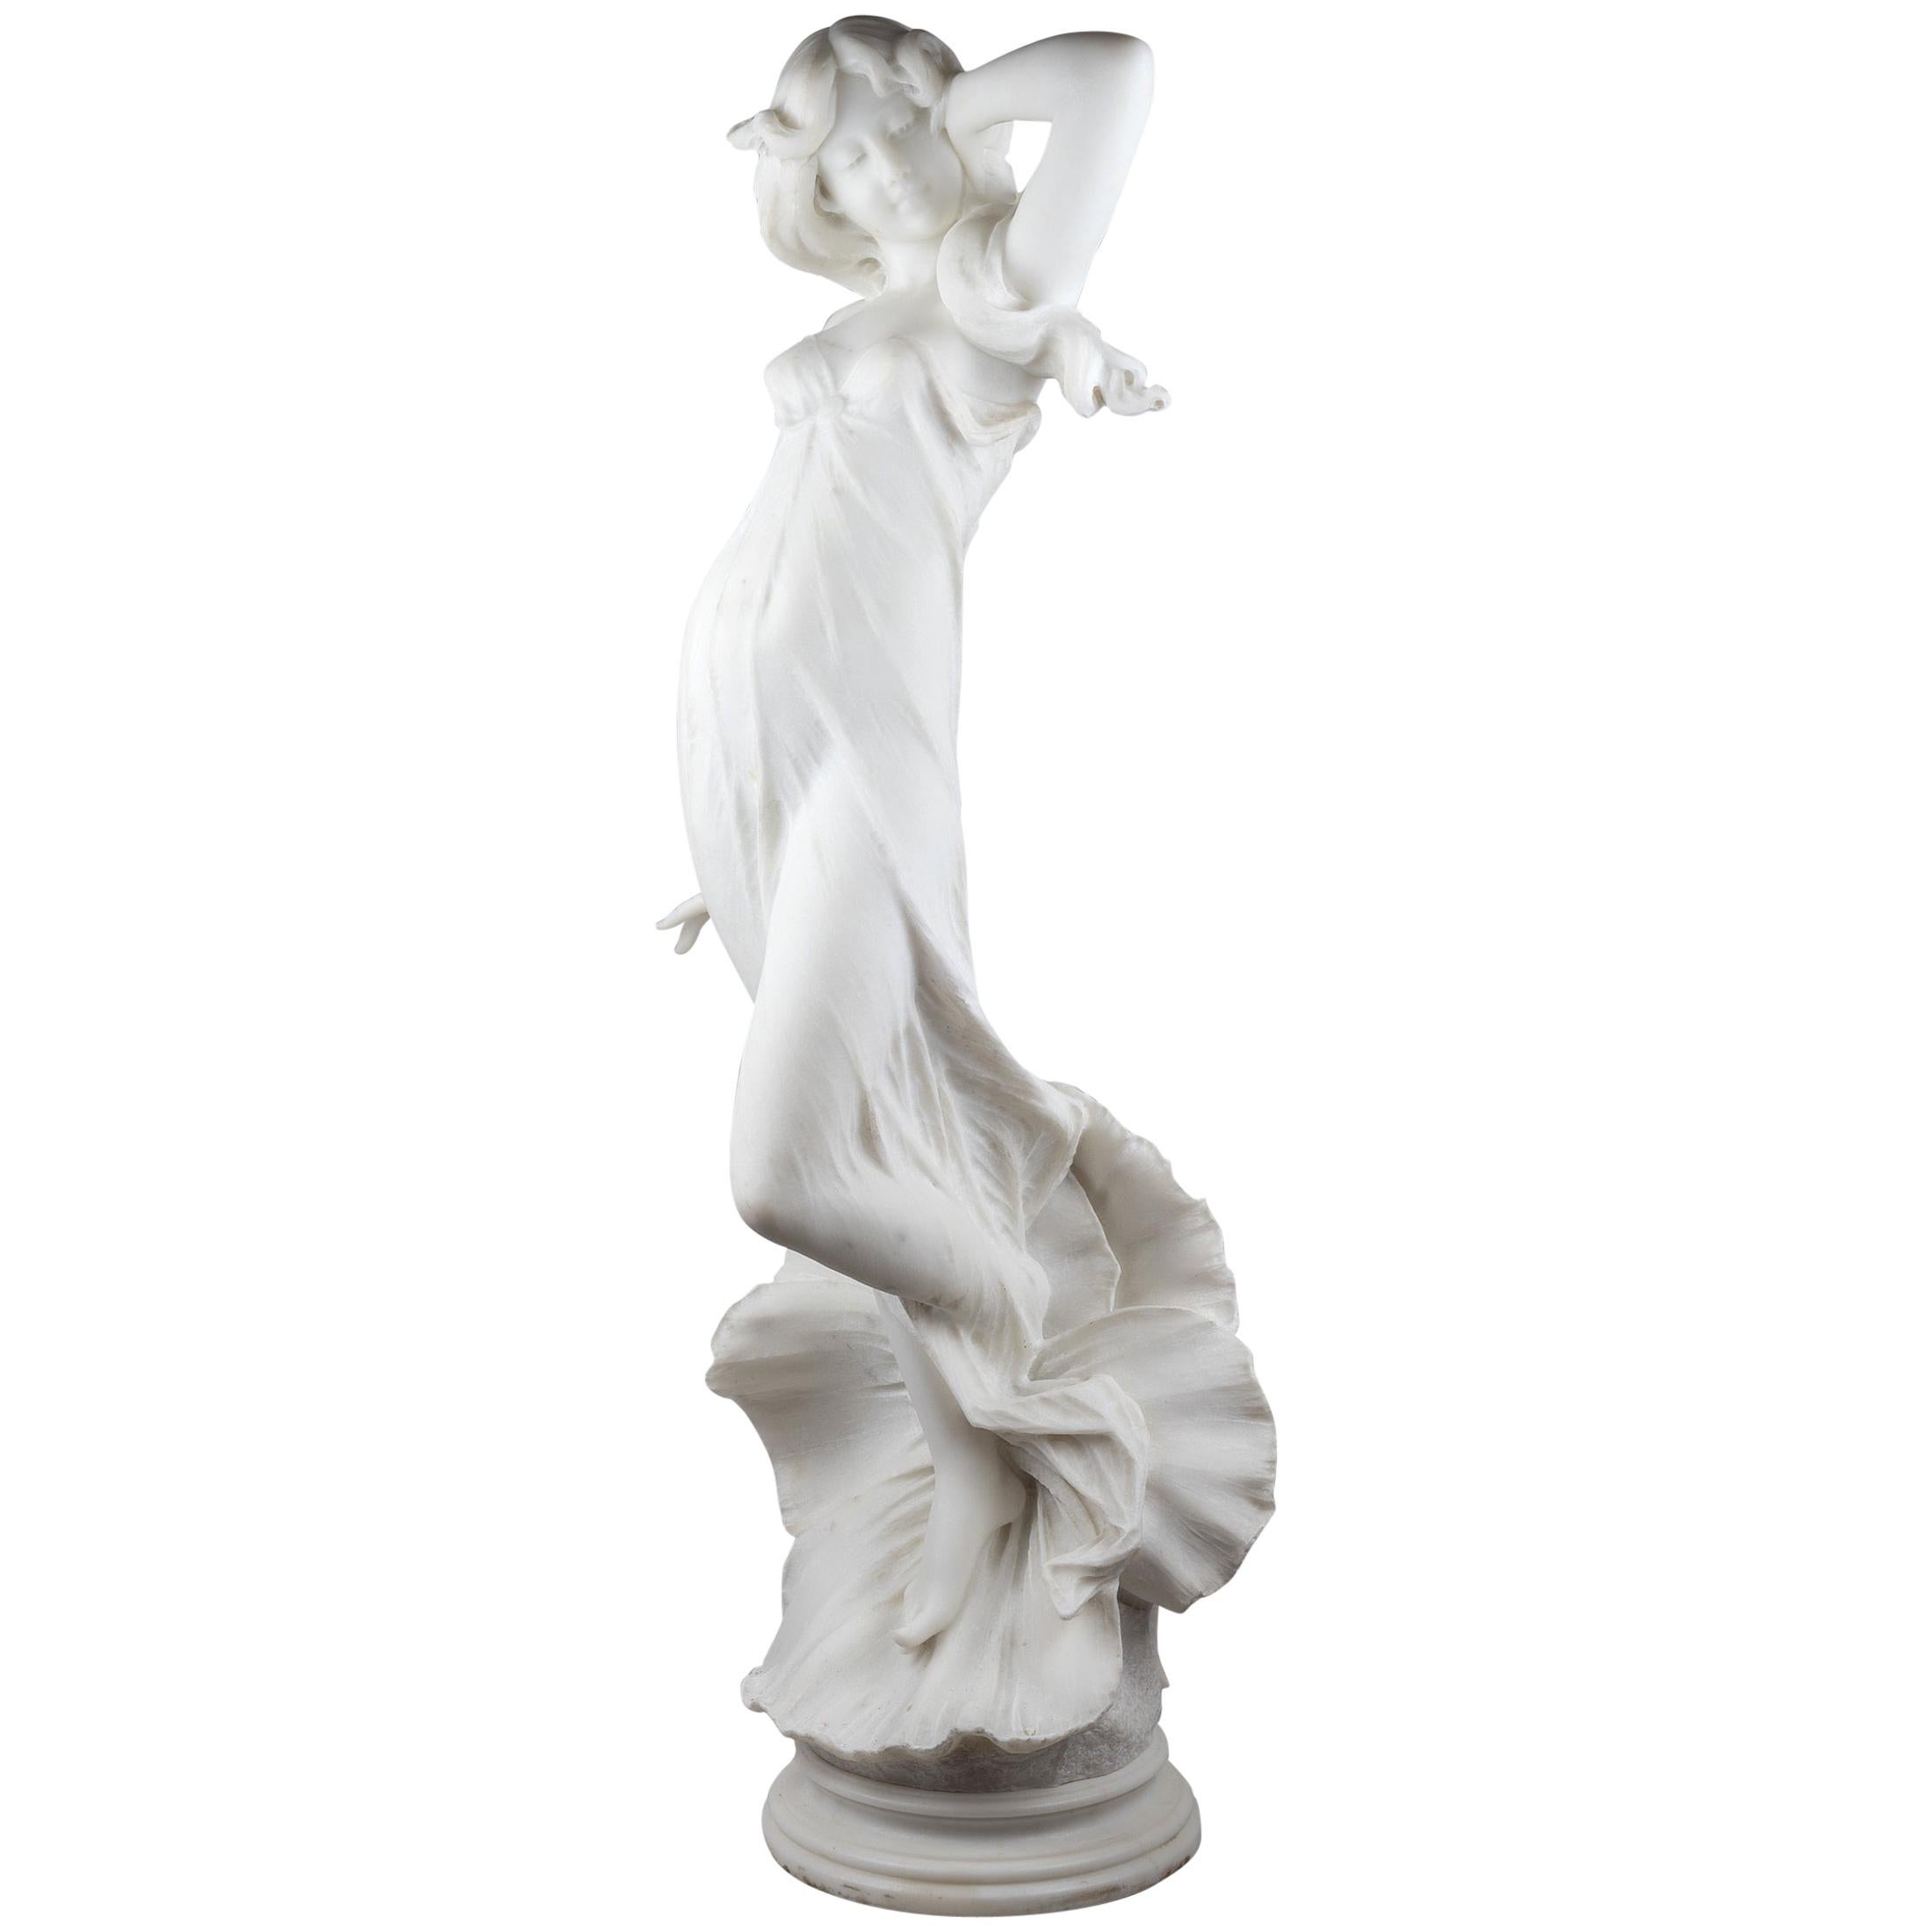 Italian White Marble Sculpture of a Female Allegorical Figure by Batacchi